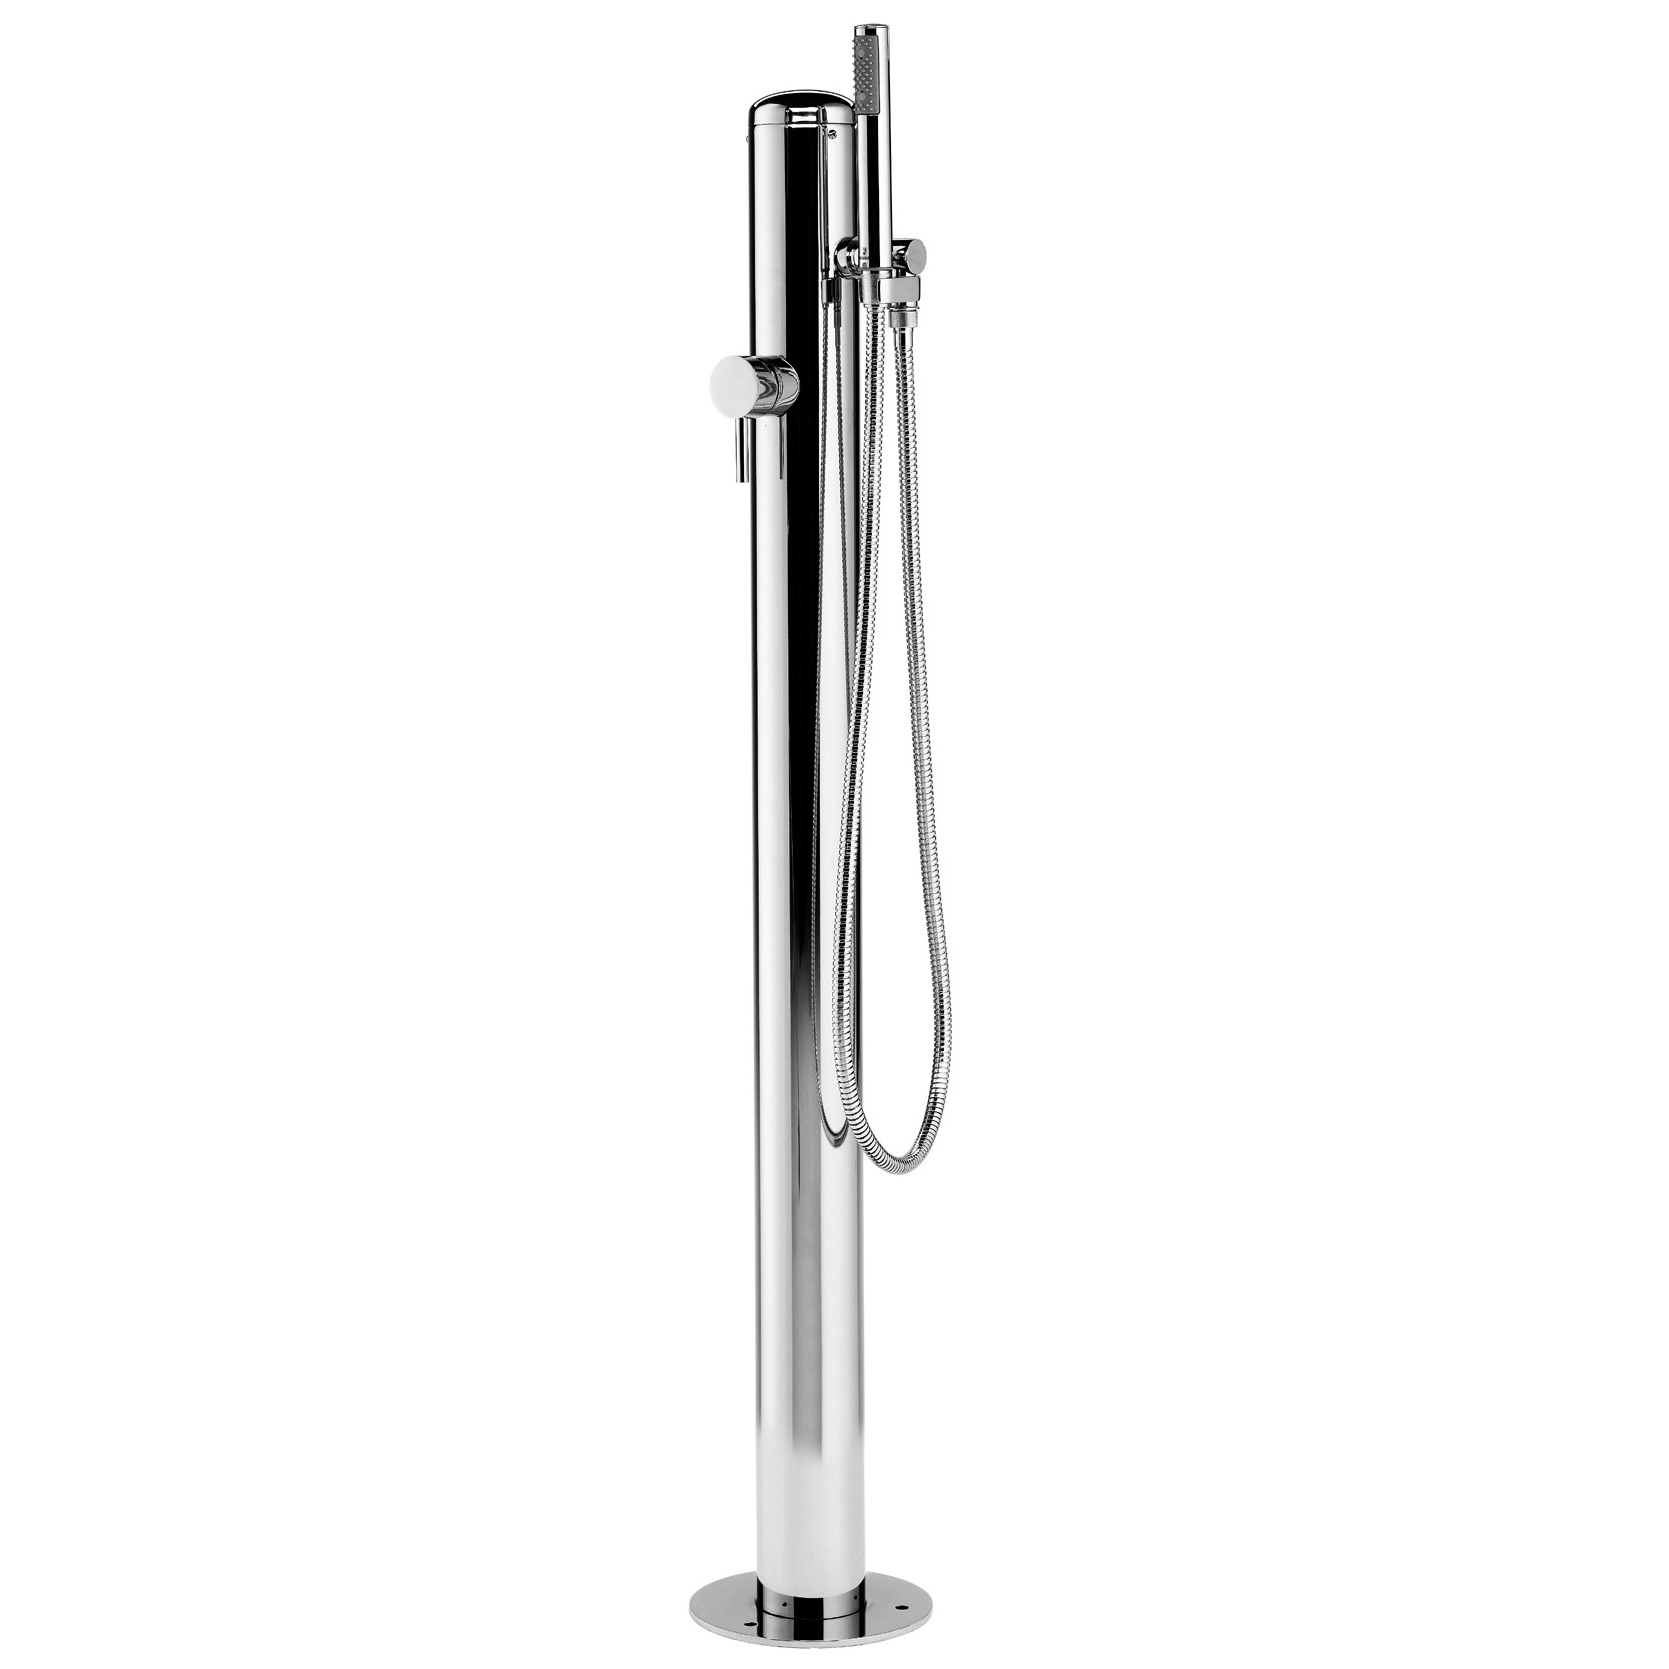 Spring 901 316 Marine Grade Stainless Steel Free Standing Hot and Cold Hand Spray